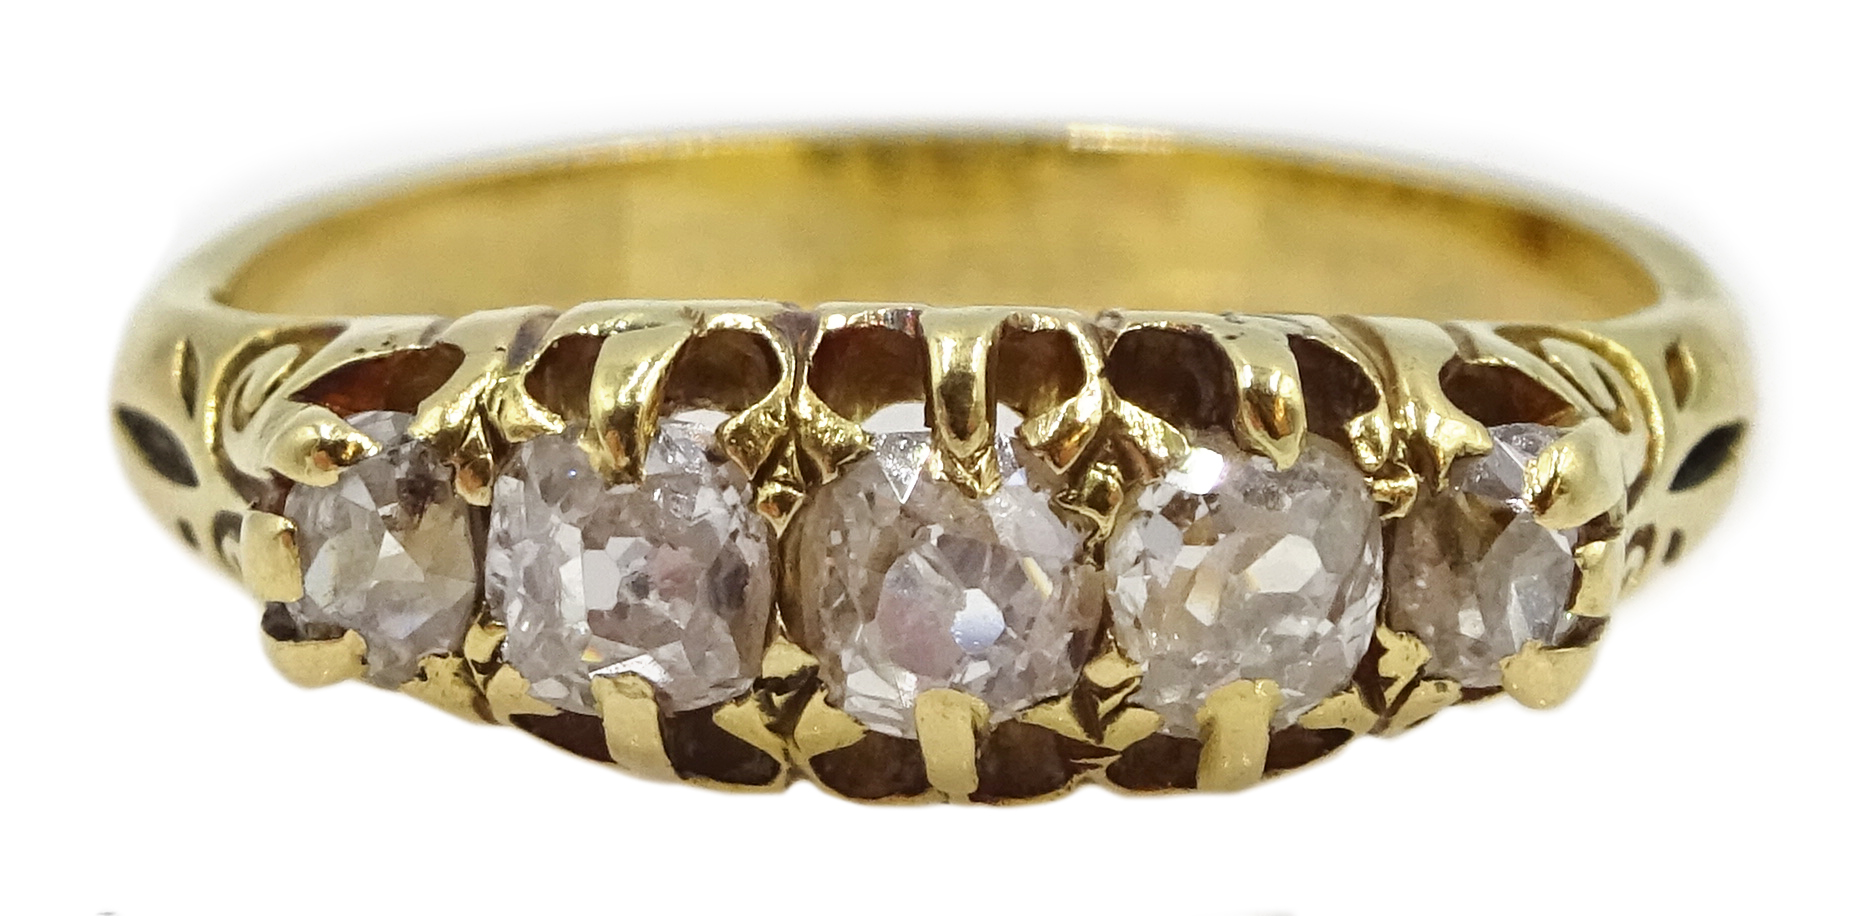 18ct gold five stone old cut diamond ring, total diamond weight approx 0.40 carat - Image 5 of 8